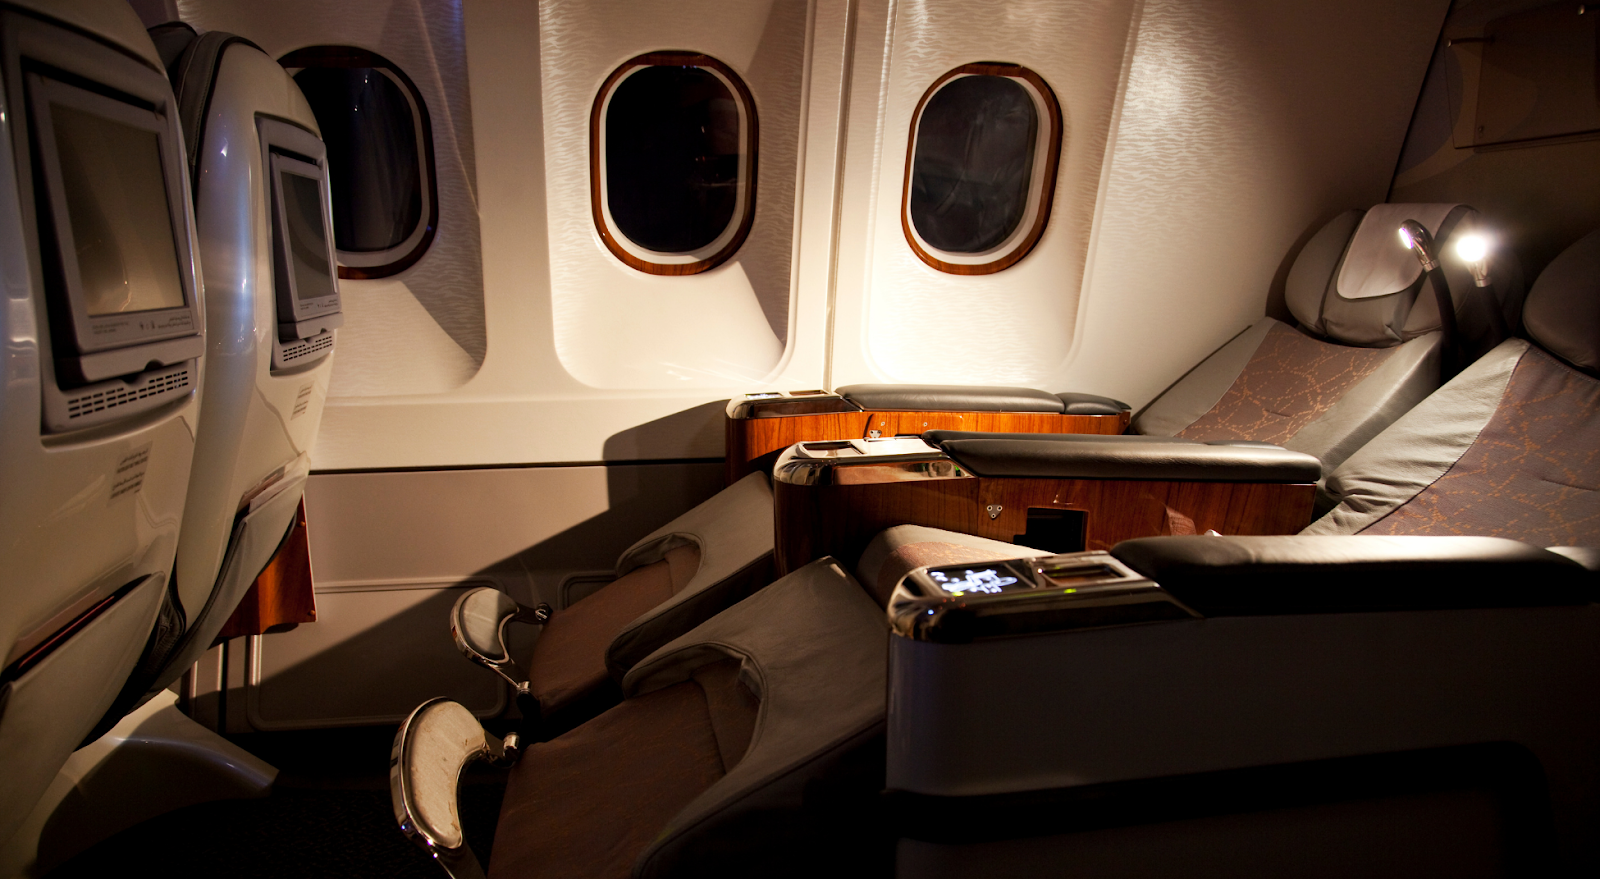 seats reclined in business class on overnight flight